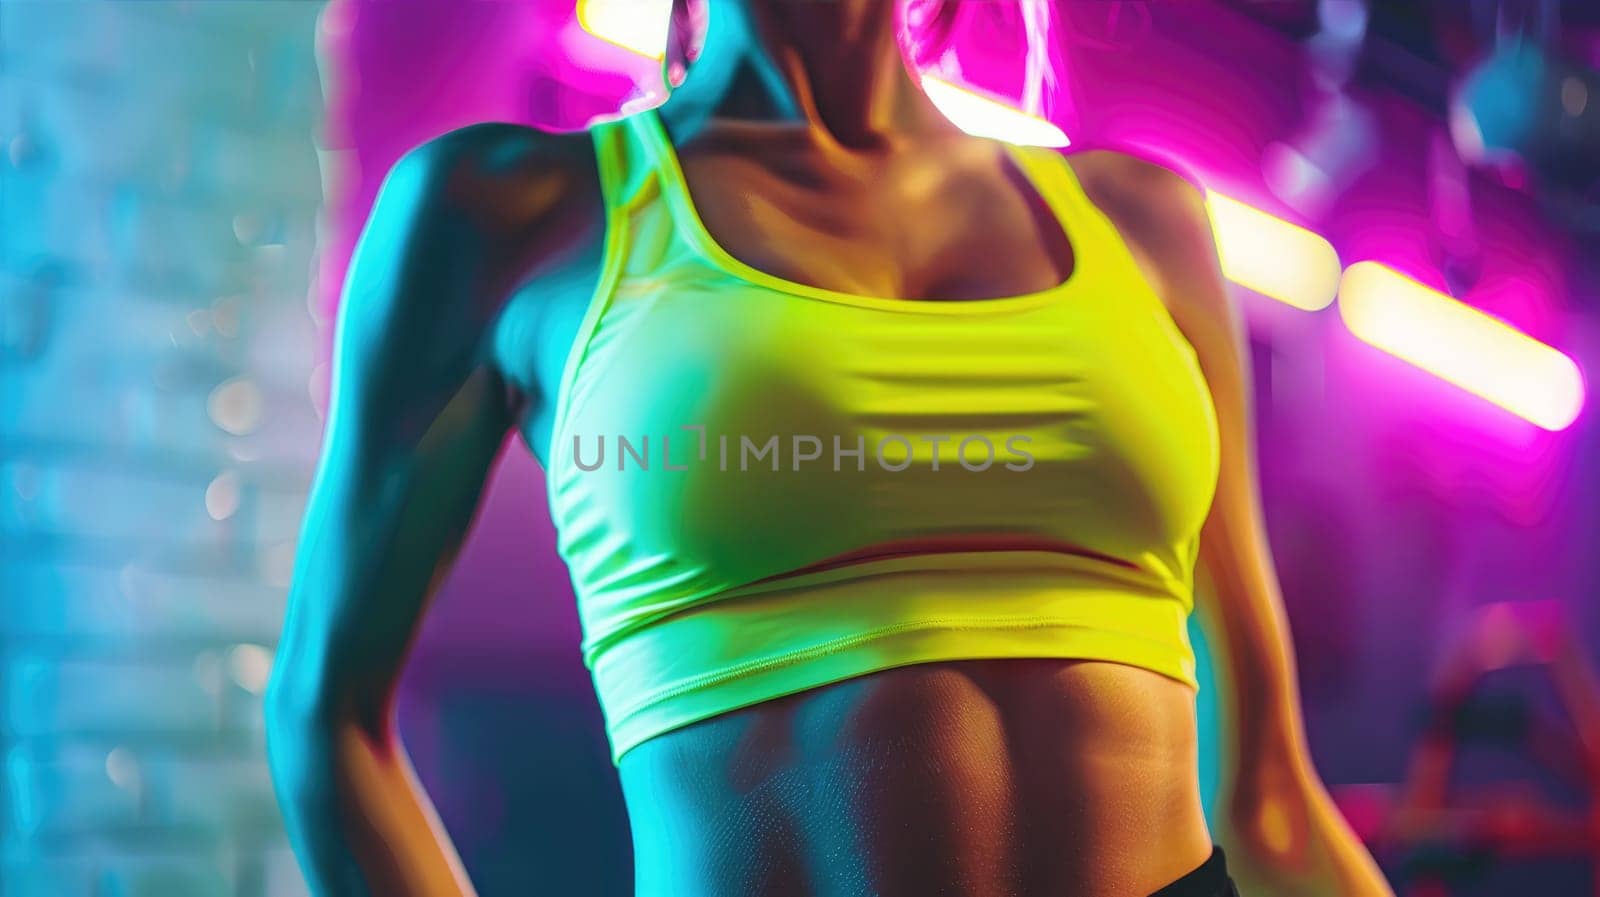 Abdominal muscles of fit fitness woman in neon top by natali_brill